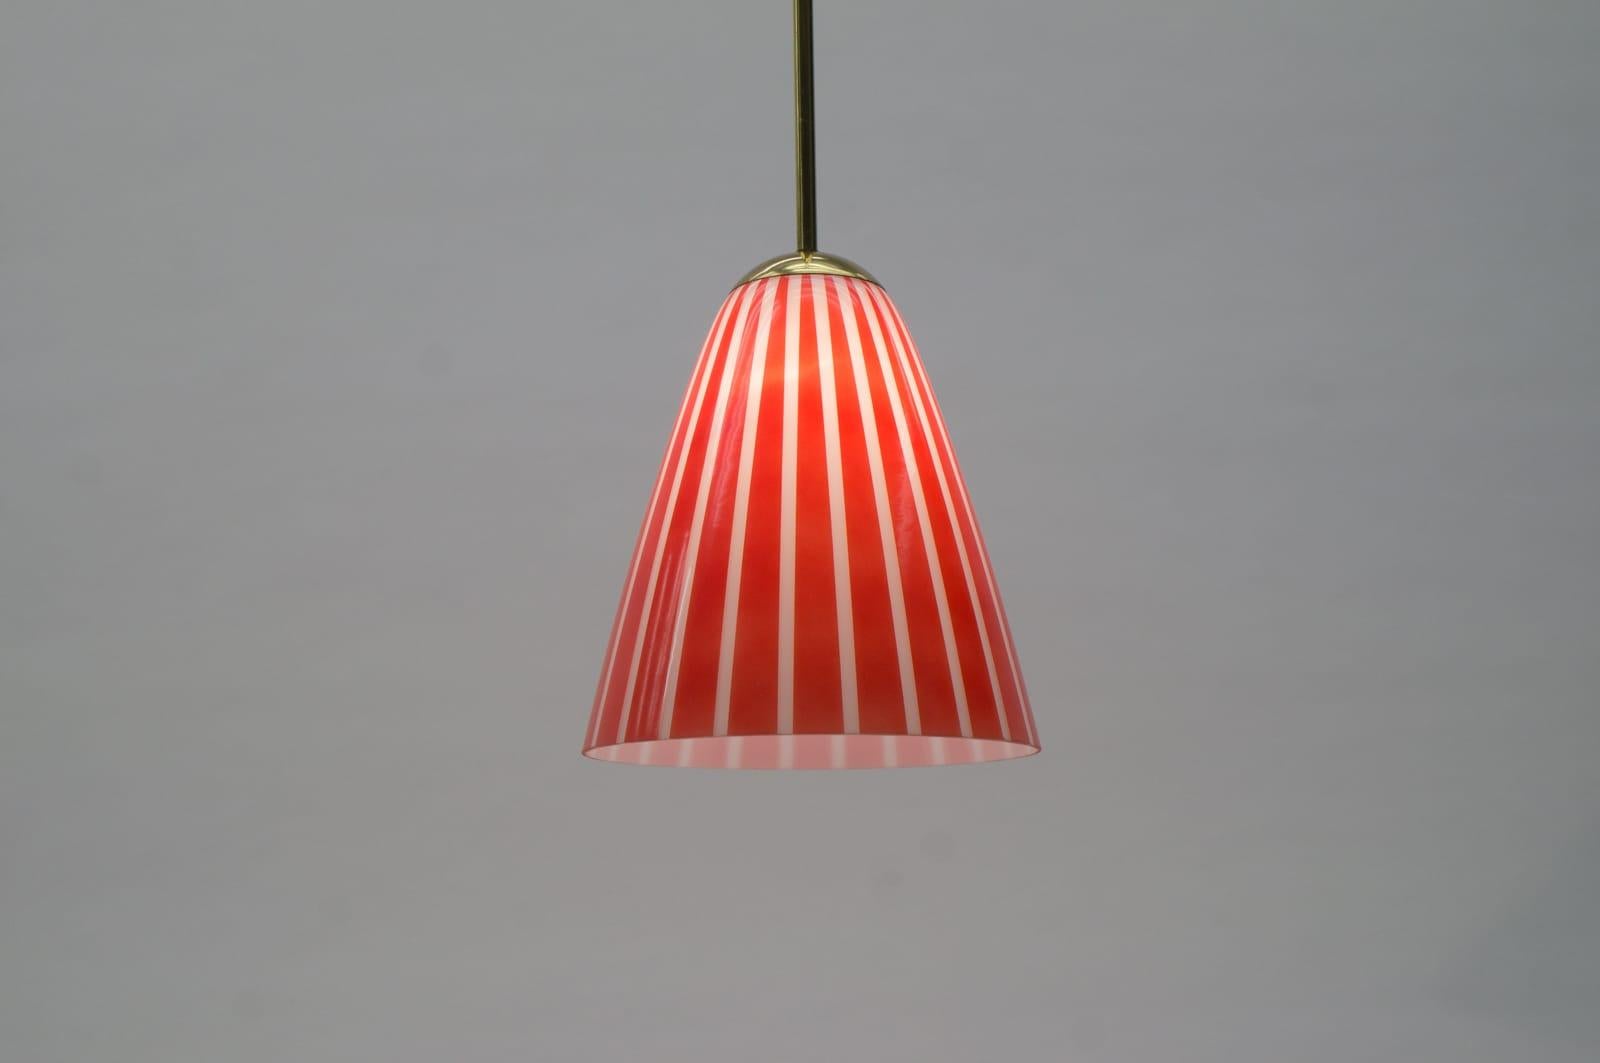 Austrian Elegant Mid-Century Modern Pendant Lamp Made of Brass and Glass, 1950s Austria For Sale